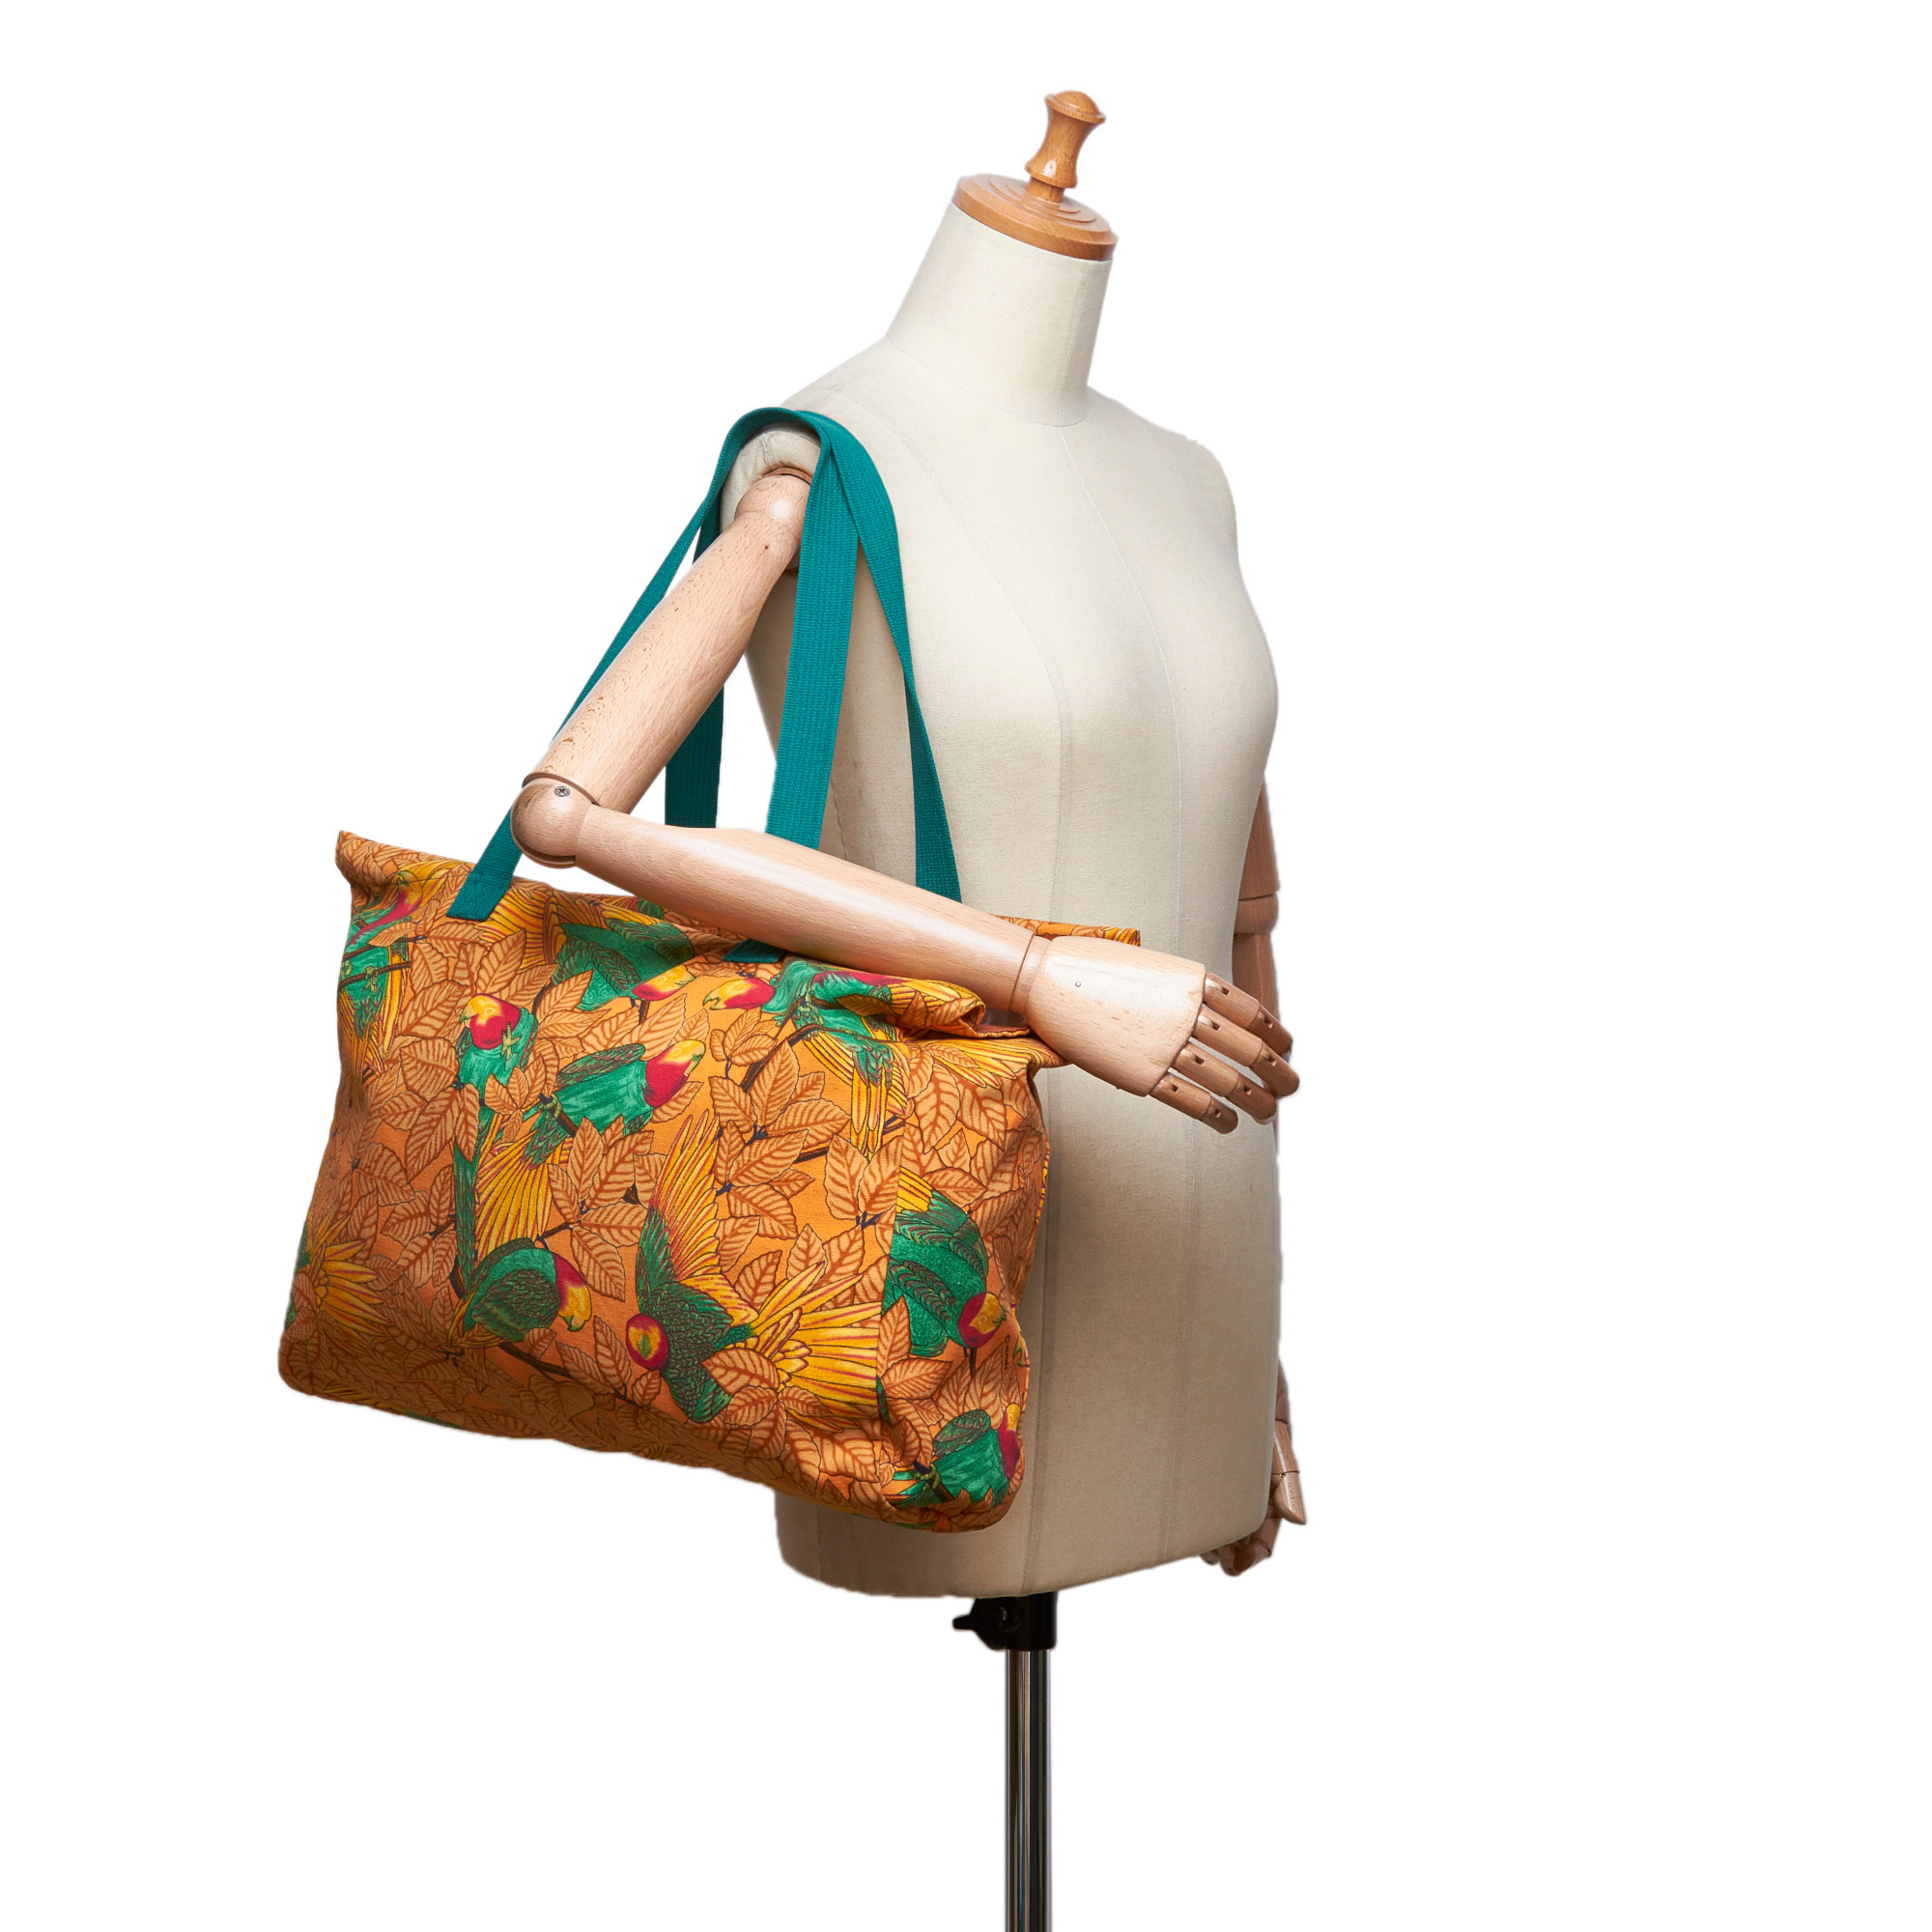 Hermes Printed Canvas Tote Bag, this tote bag features a printed canvas body, flat handles, and an - Image 7 of 10